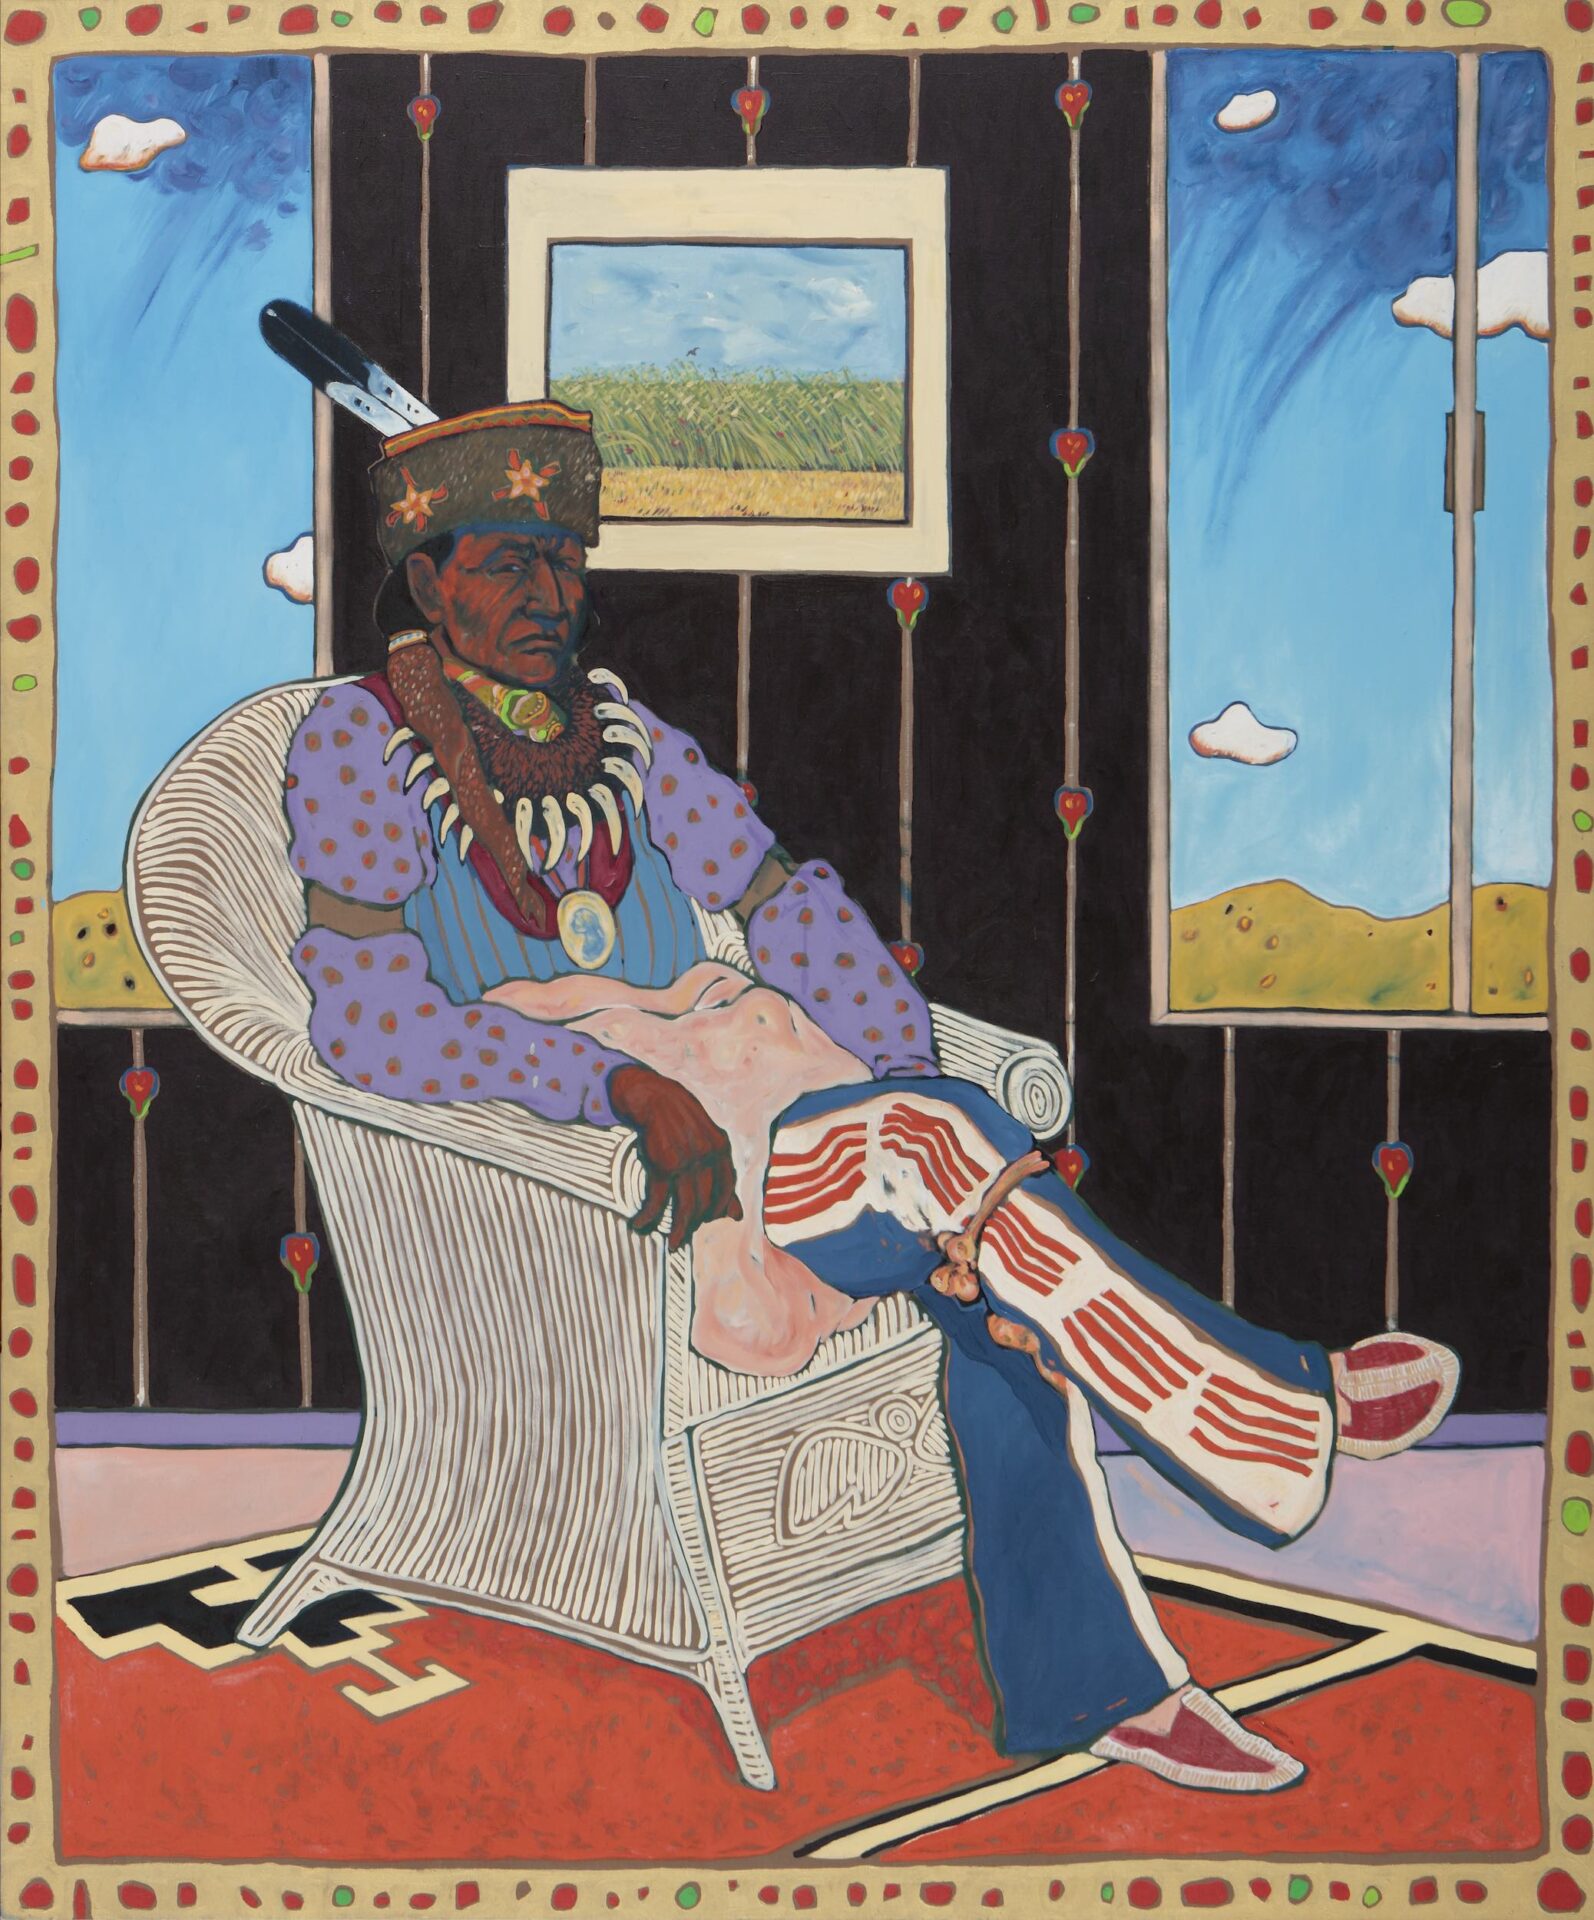 A painting of a man sitting in a chair.